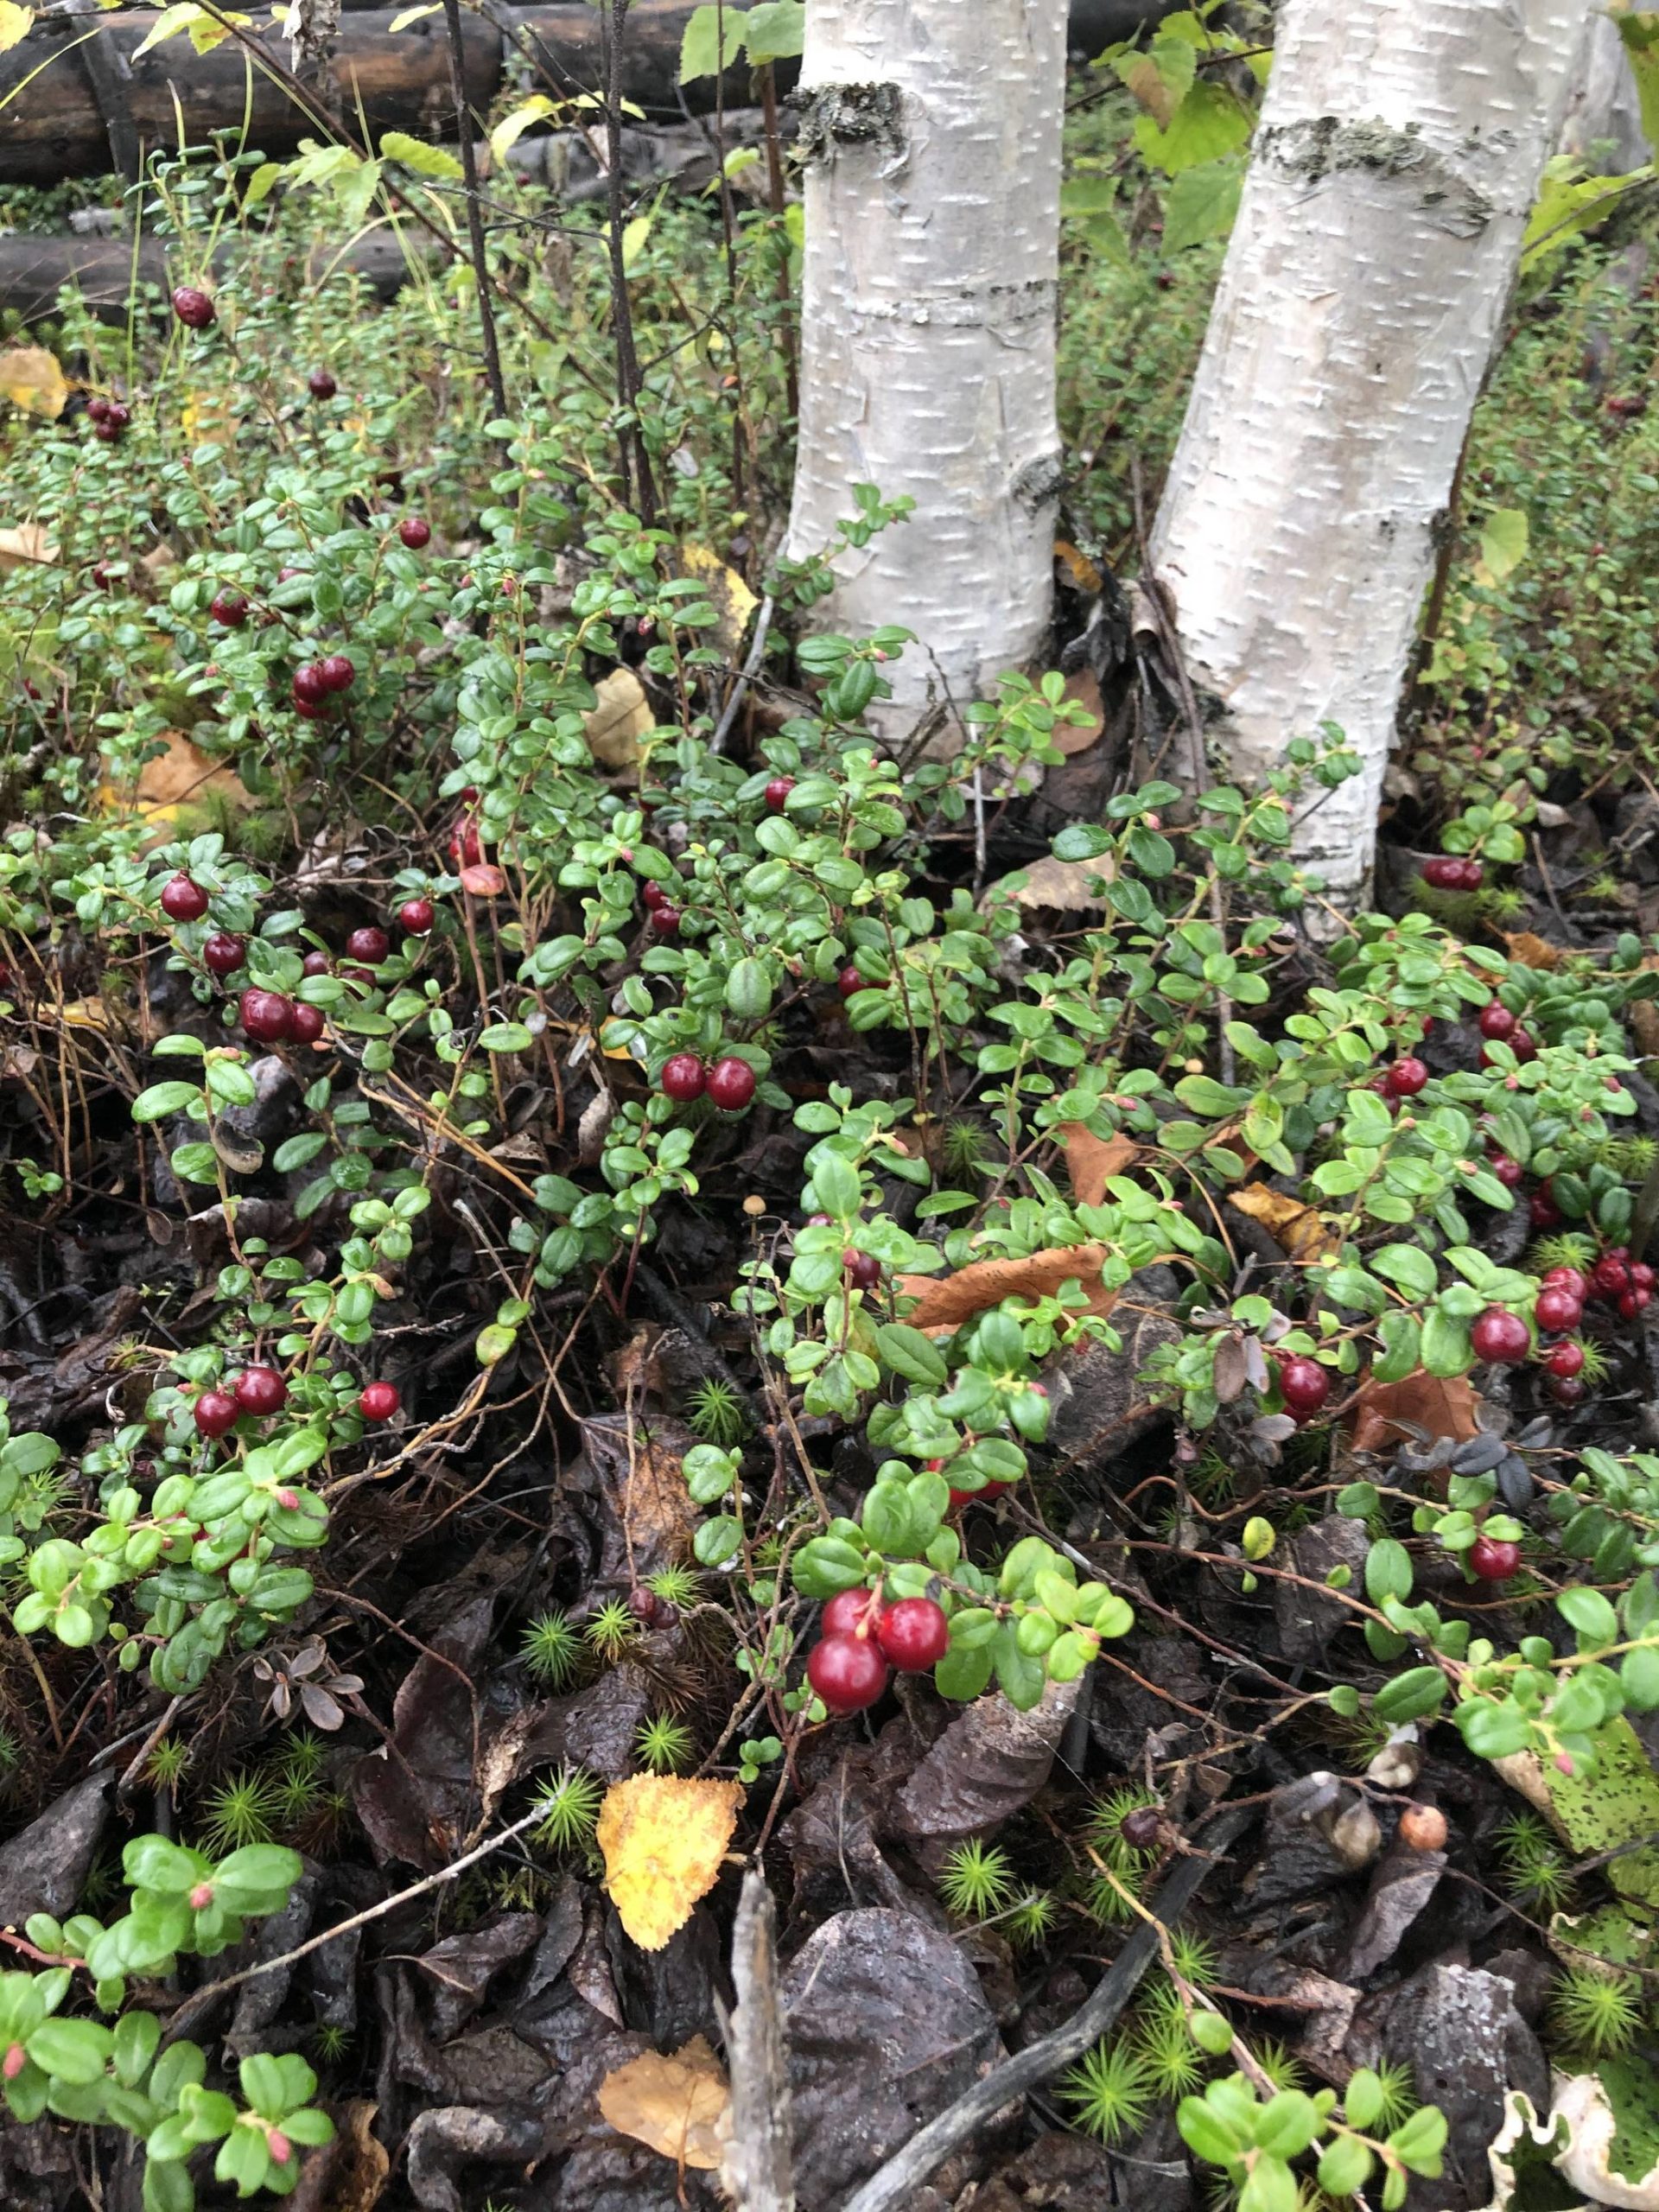 Low-bush cranberries are ready to be picked in Anchorage, Alaska, on Monday, Sept. 7, 2020. (Photo by Victoria Petersen/Peninsula Clarion)